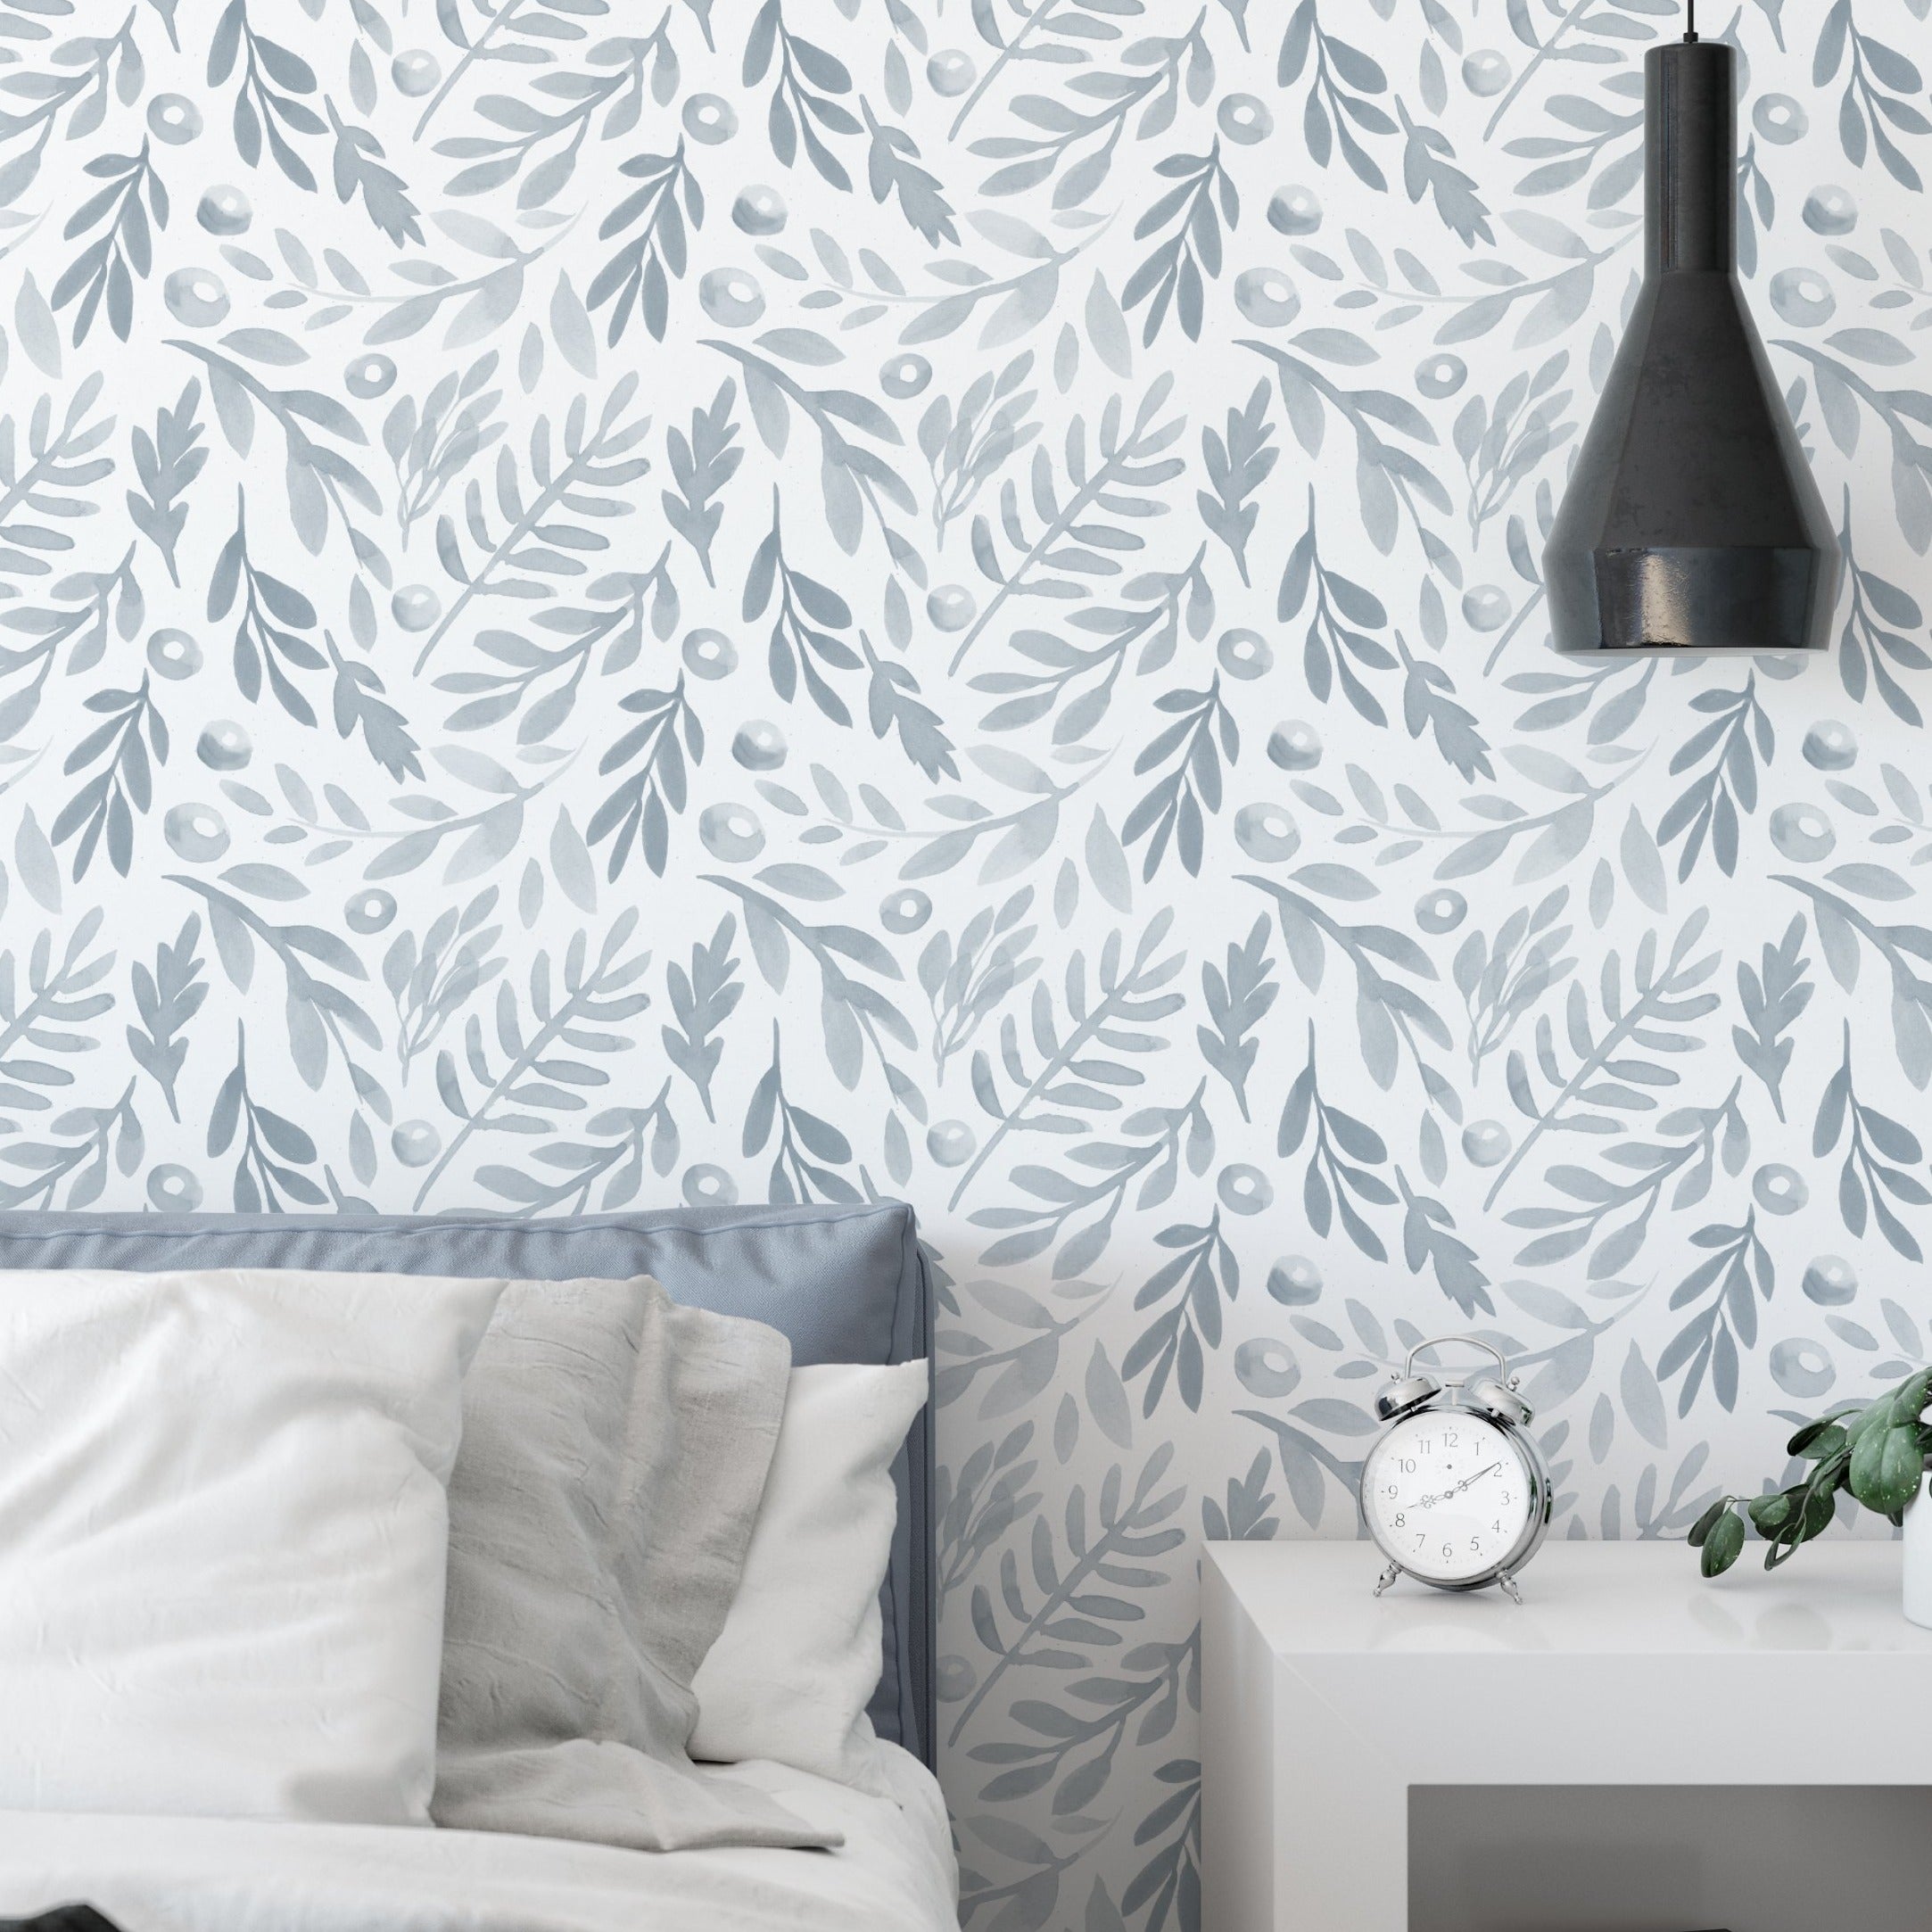 A bedroom setting adorned with 'Watercolor Subtle Botanica - Pale Blue' wallpaper that brings a soothing ambiance to the room. The pale blue leafy design pairs well with the minimalistic bedroom furniture, enhancing the peaceful and restful environment.